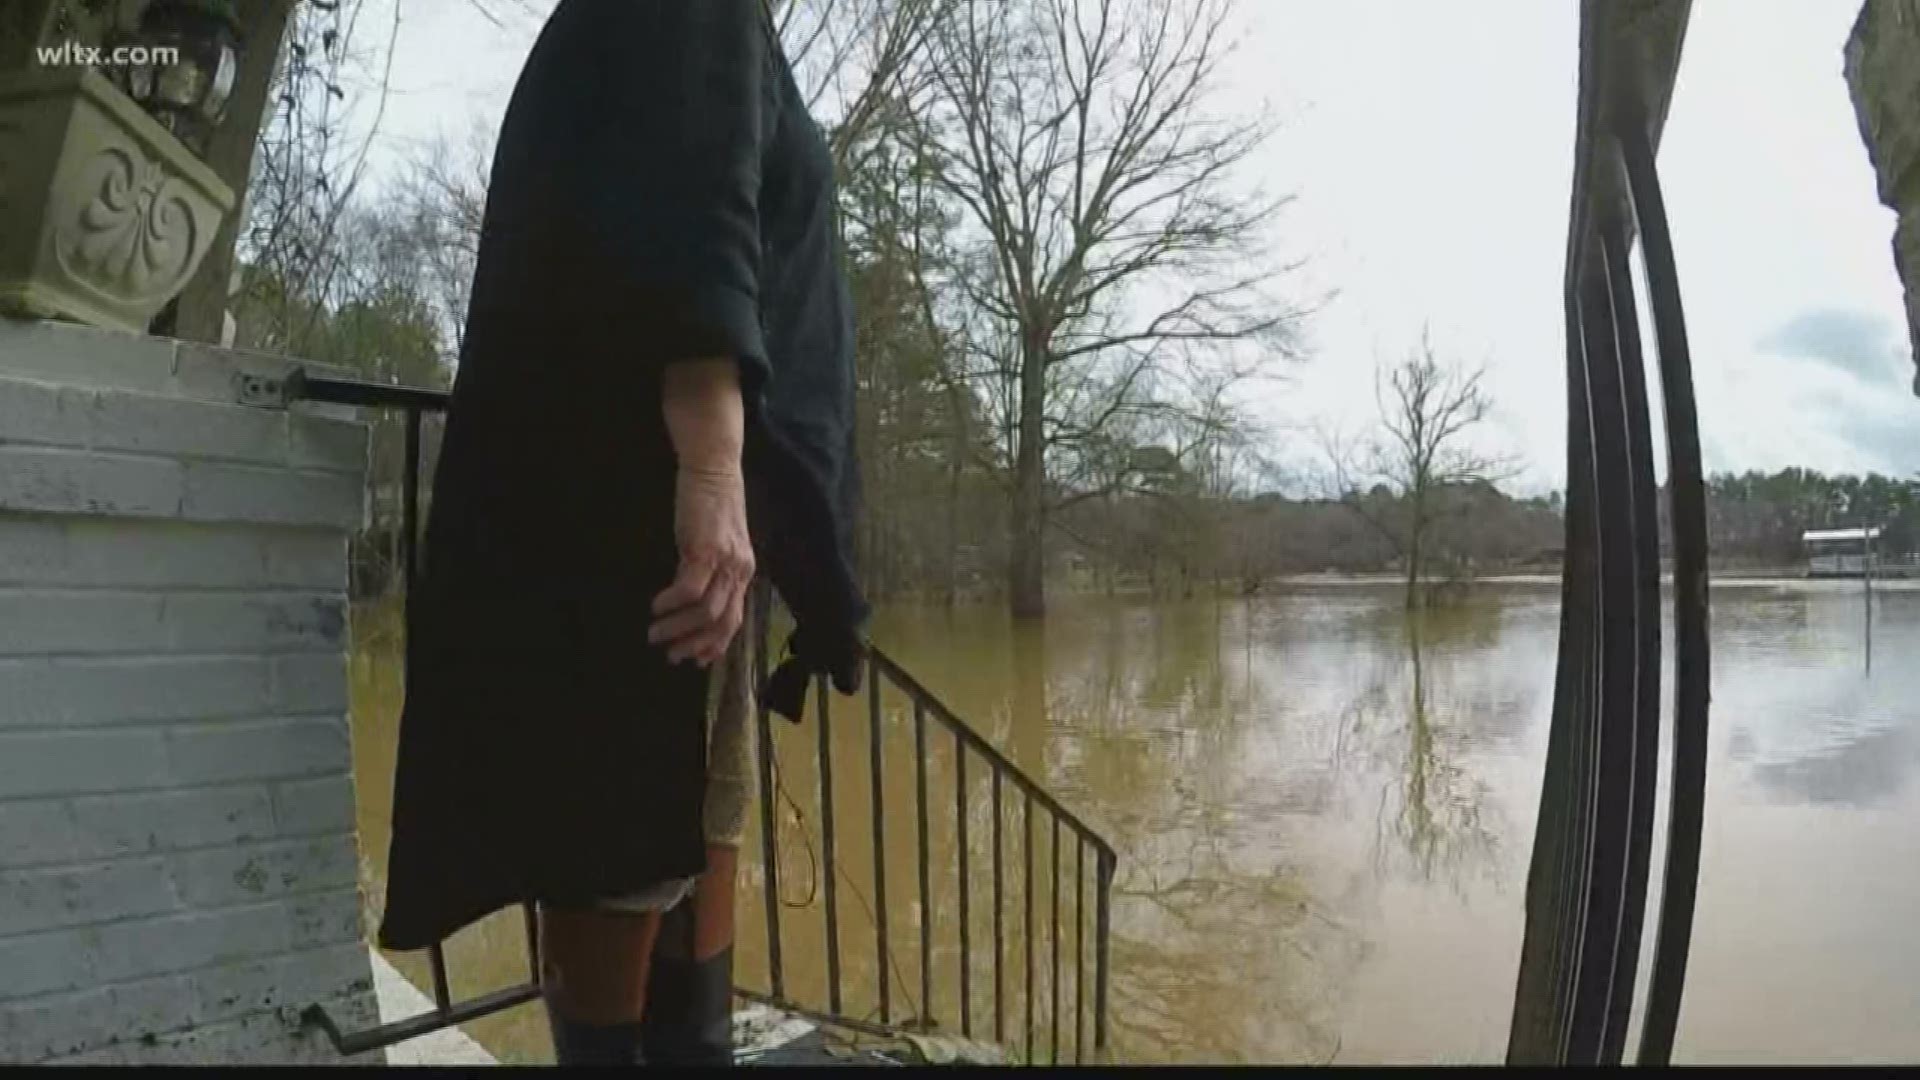 Lake Wateree residents are still feeling the effects of the flooding.